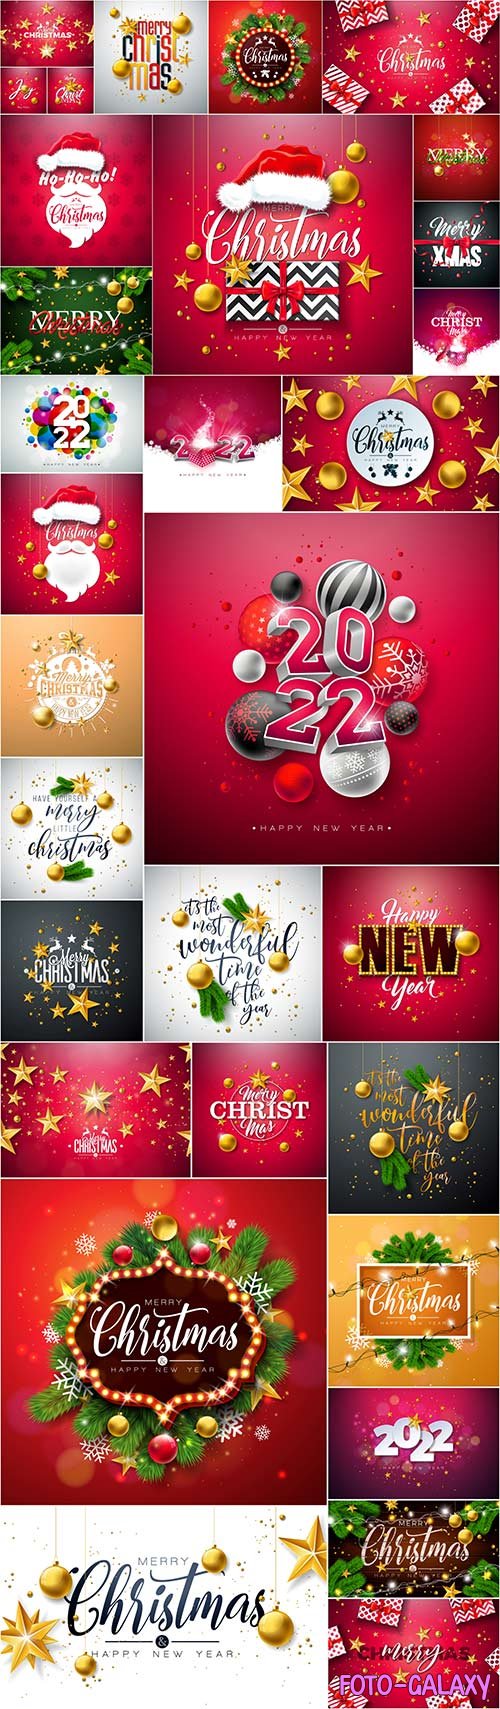 Merry christmas and happy new year illustration with gift box gold glass ball star and typography vector